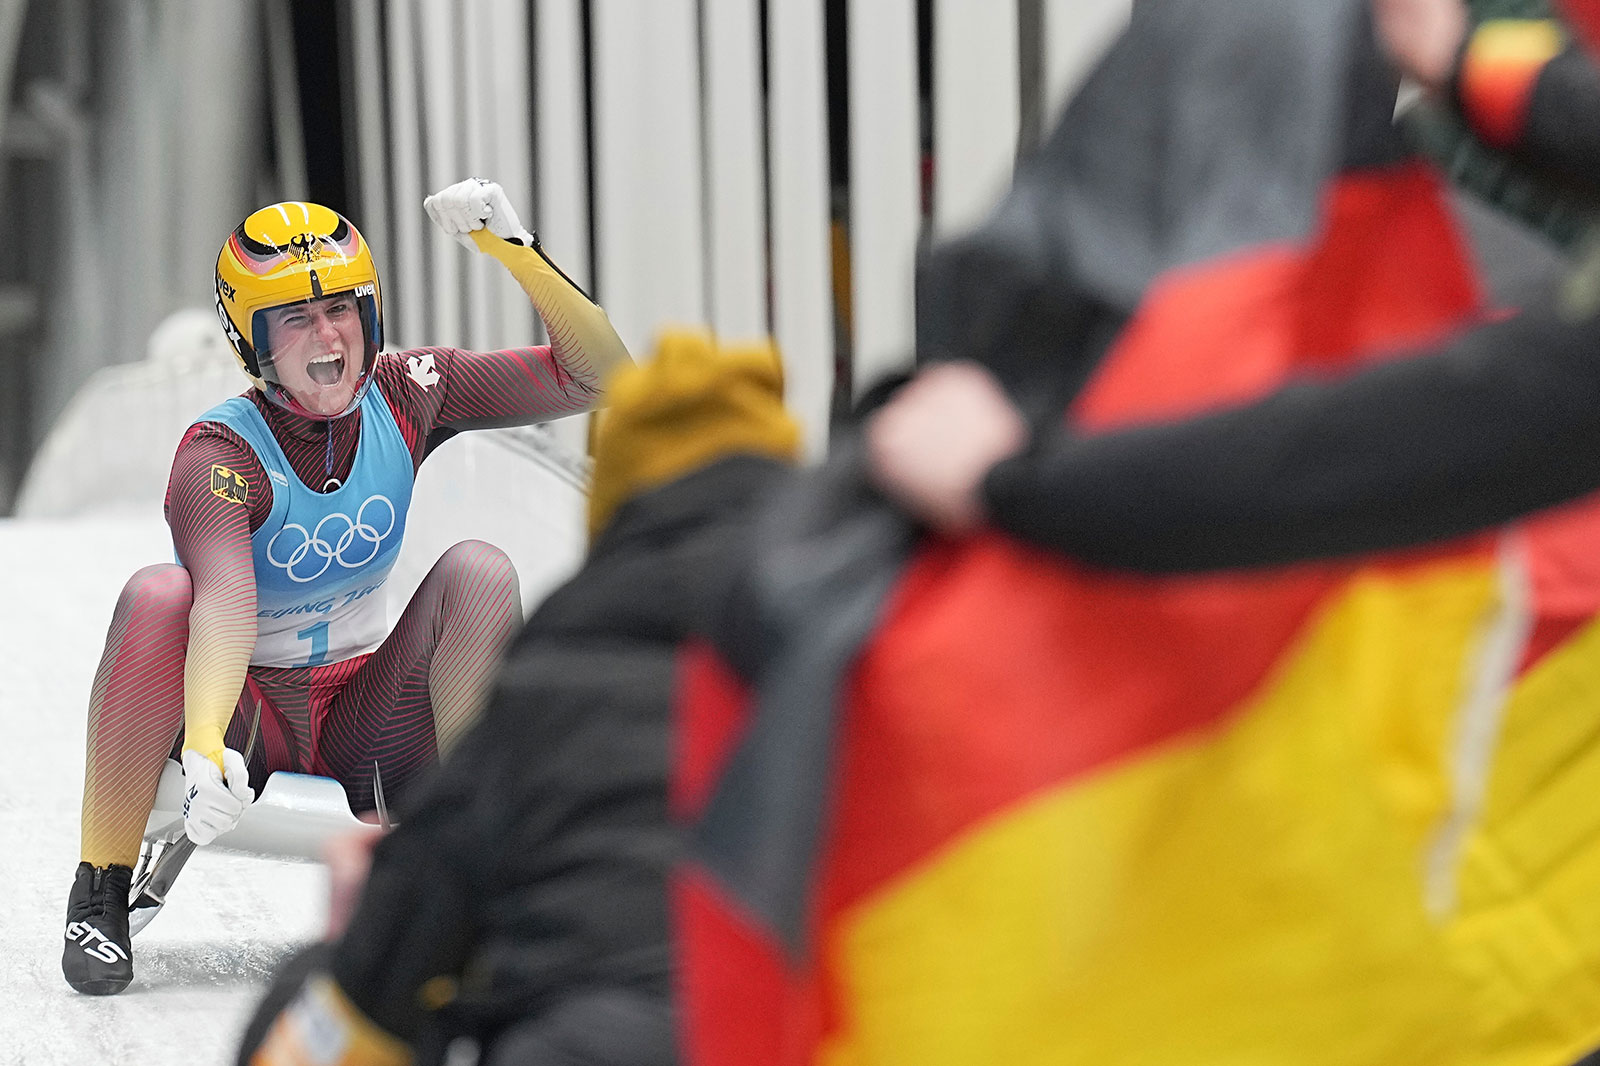 Germany's Natalie Geisenberger celebrates following her final run of the singles luge on Tuesday.